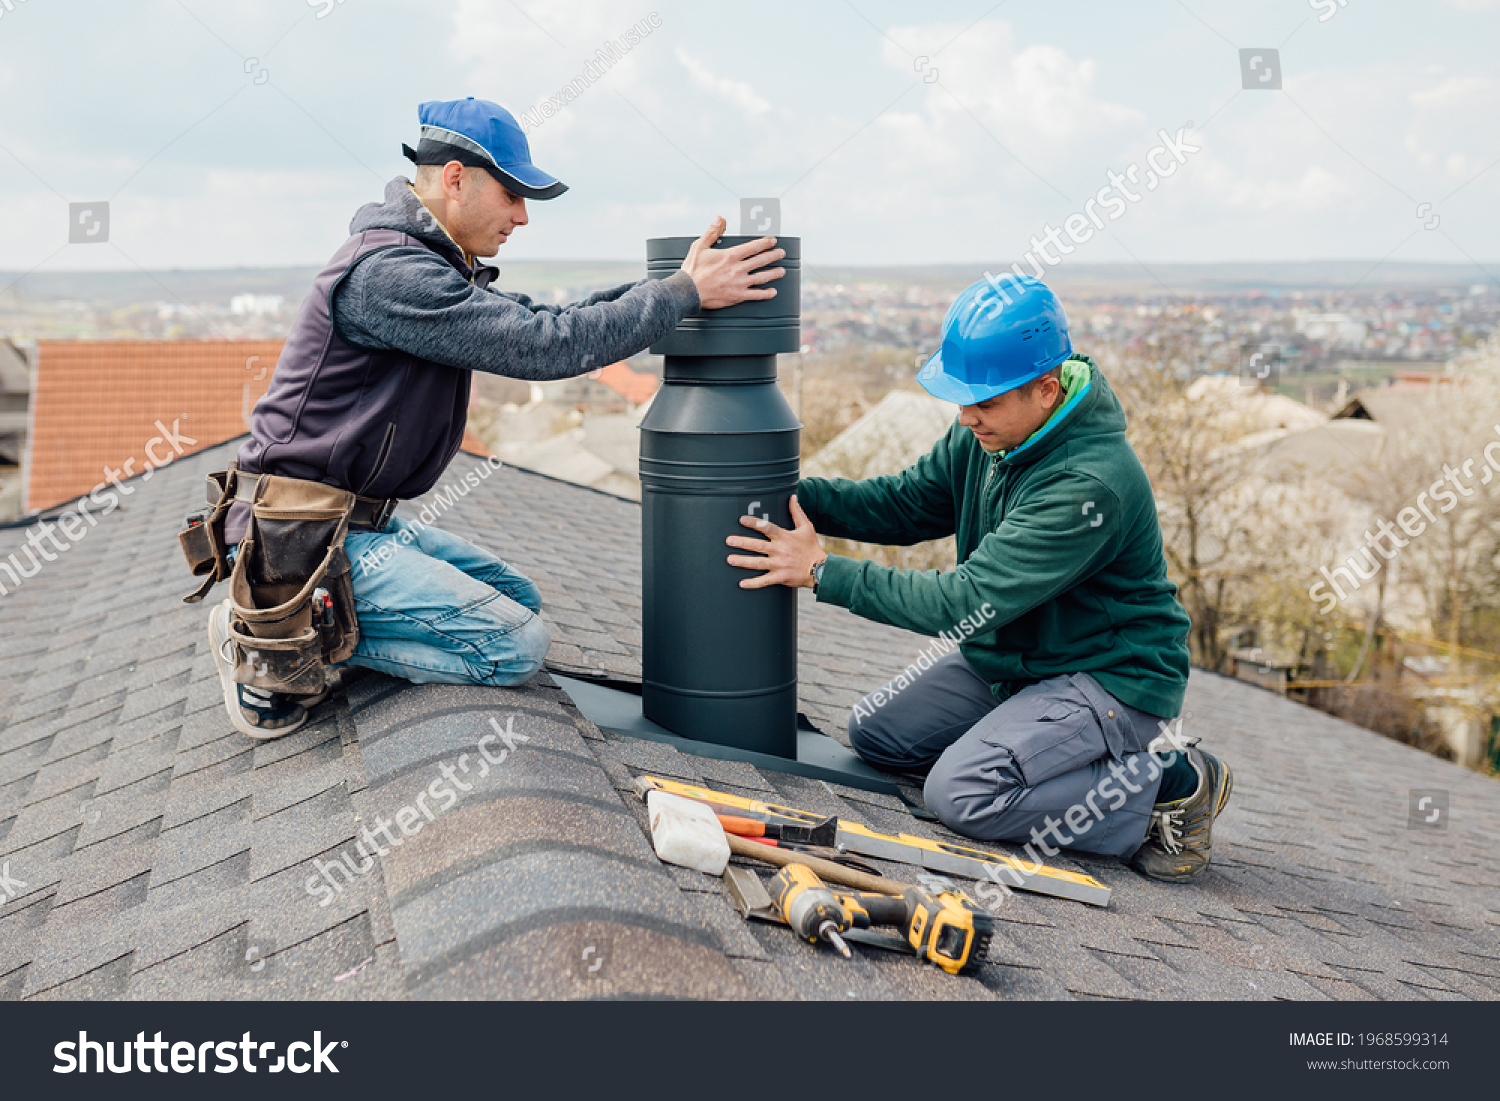 two Professional workmen's standing roof top and measuring chimney of new house under construction against blue background #1968599314